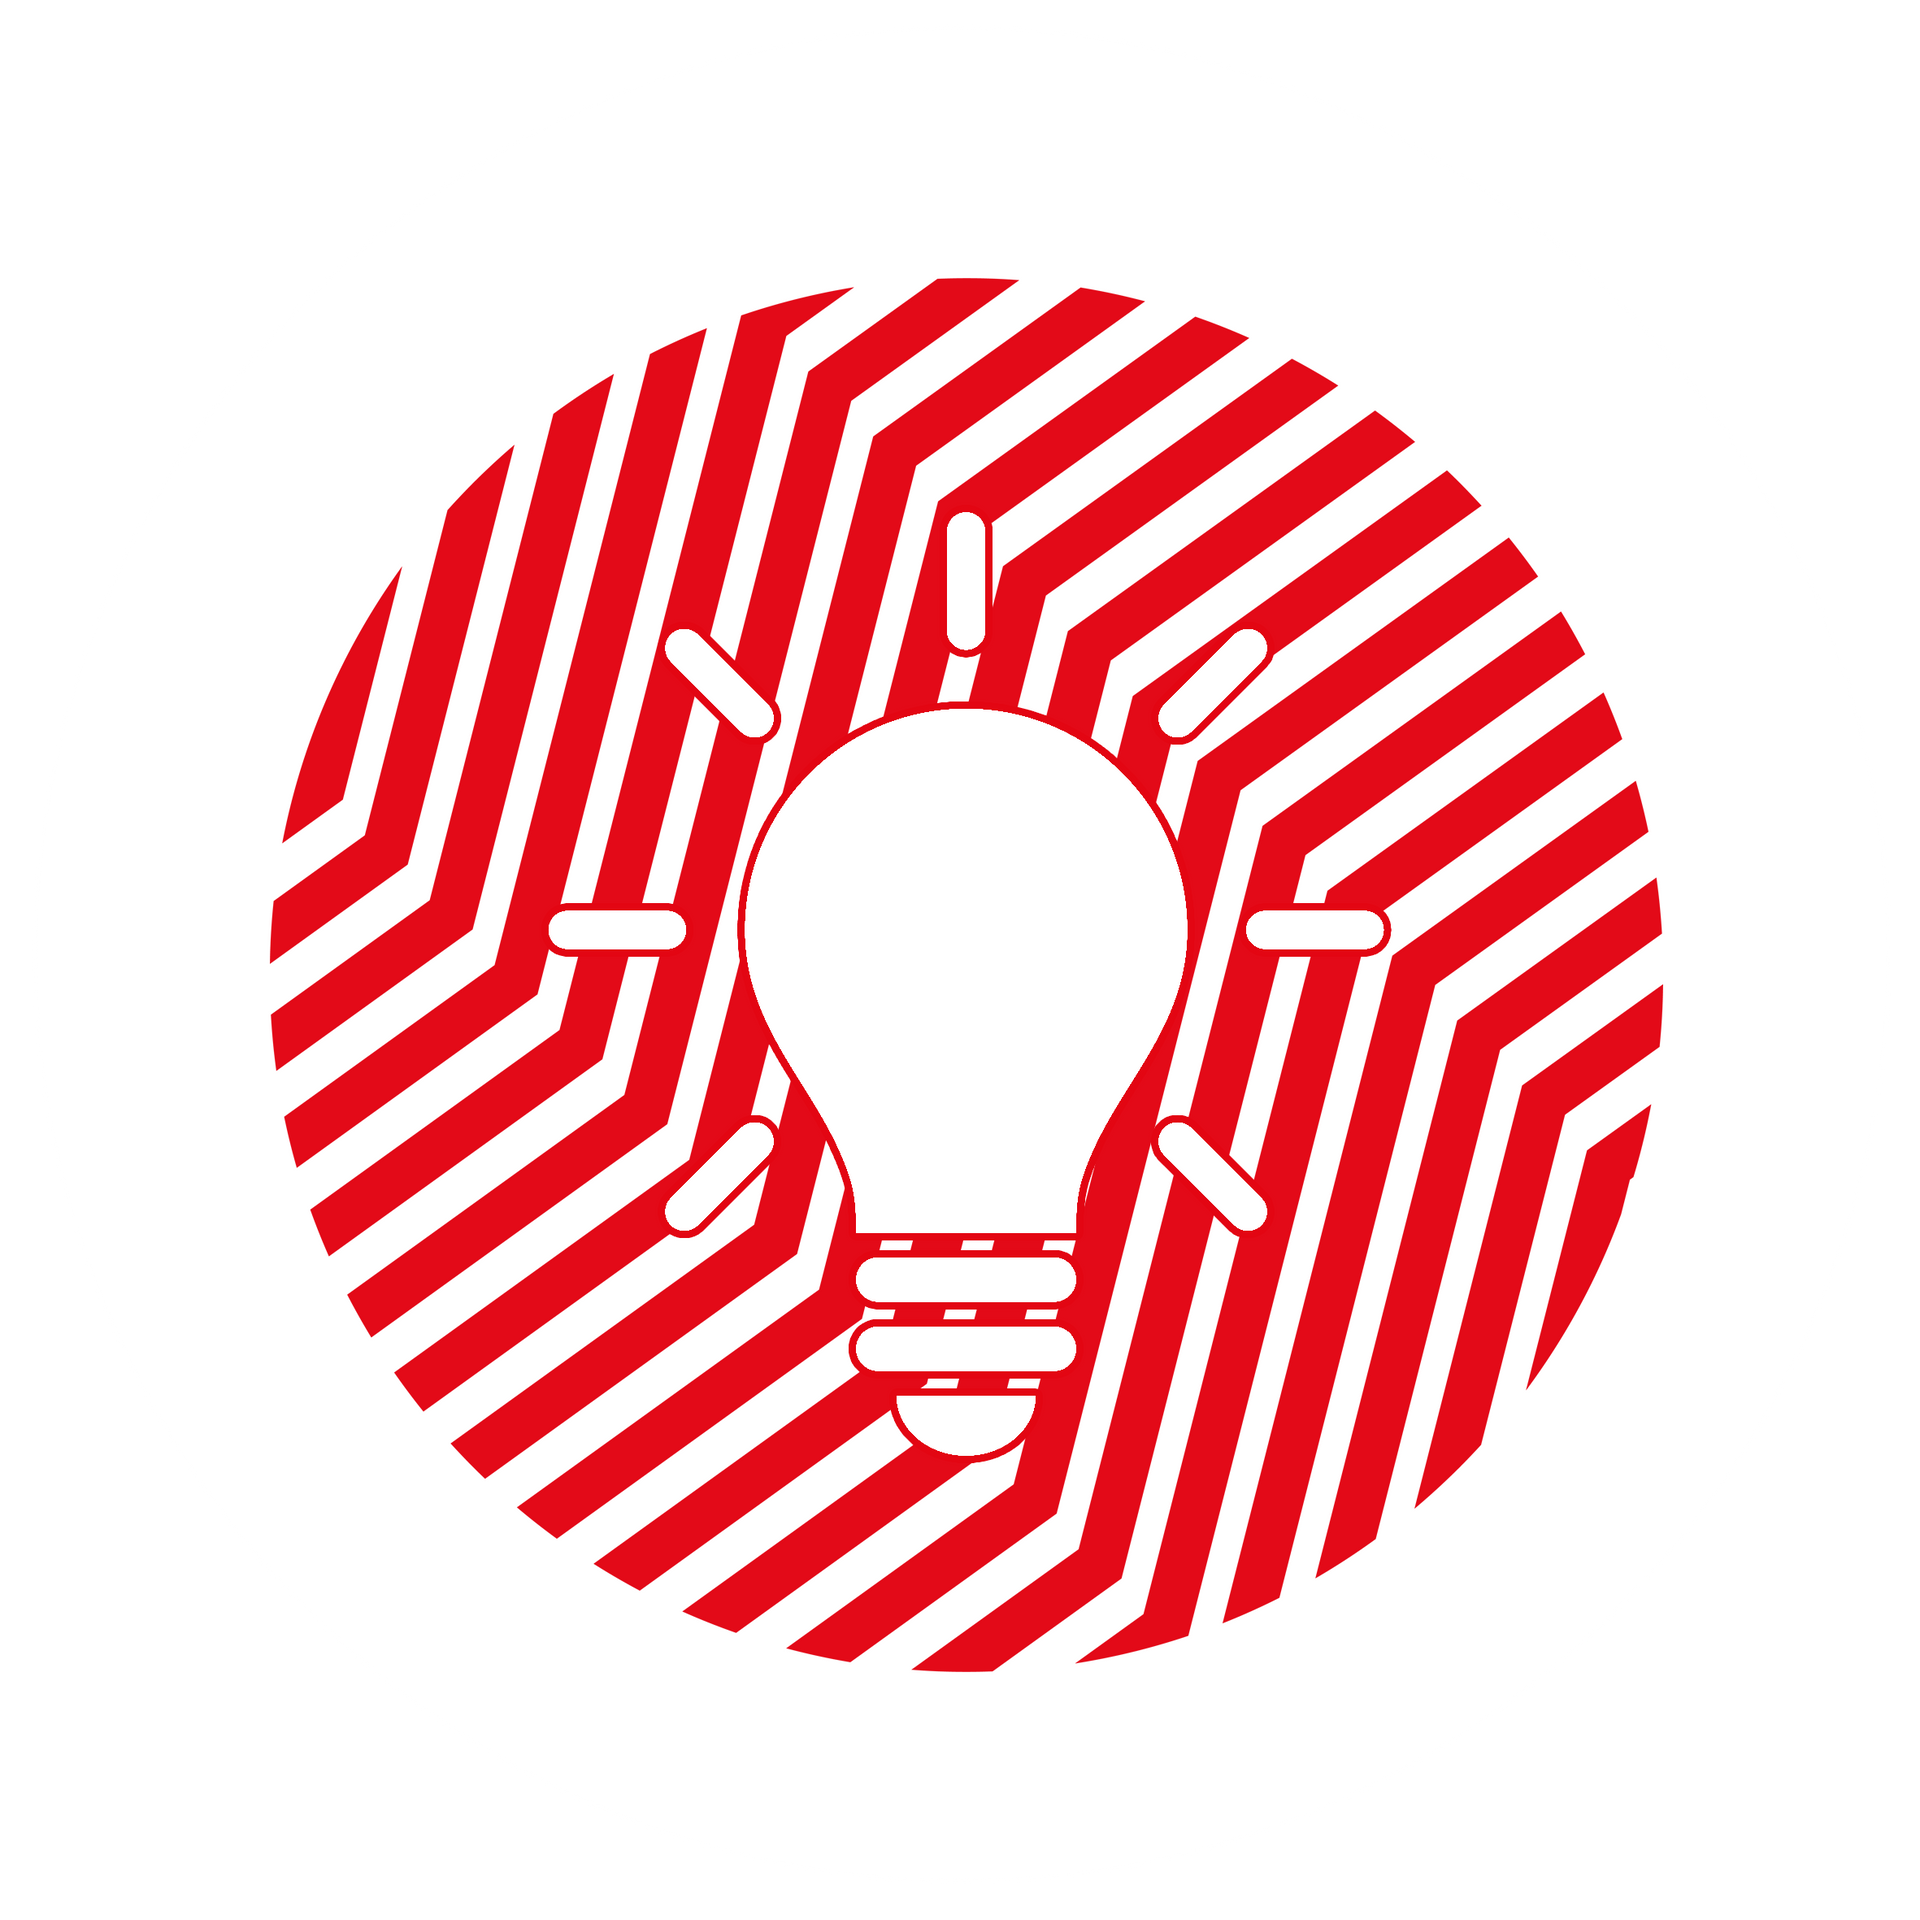 a red and white striped circle with a light bulb in the center